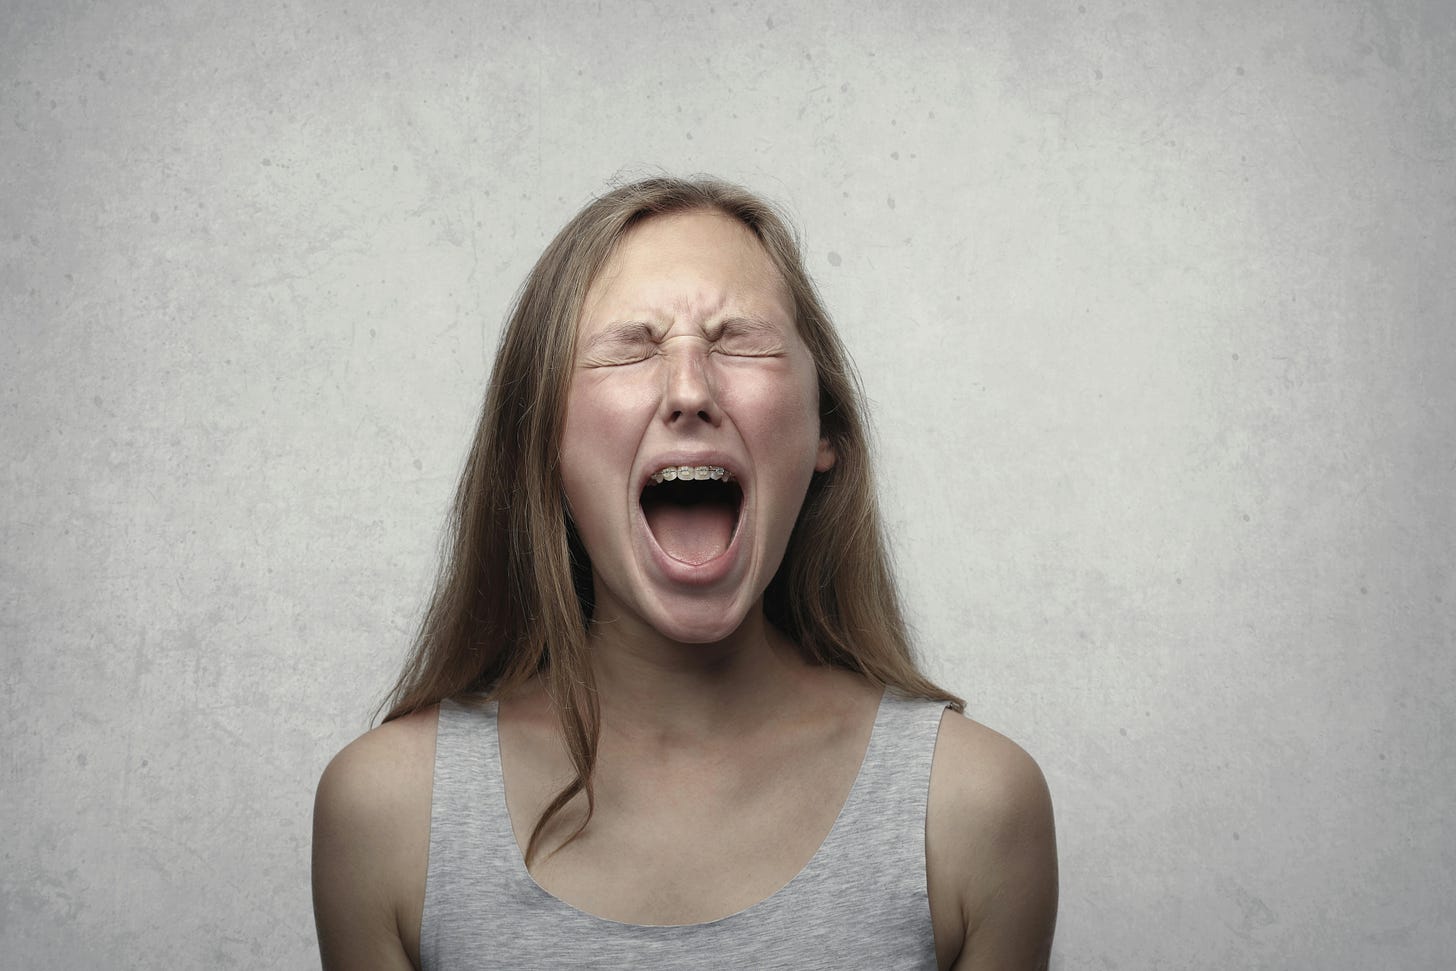 Photo by Andrea Piacquadio: white woman with dark blonde hair and in grey tank top opening her mouth and shutting her eyes like she is screaming out in pain. There is a grey background in this photo and she is wearing braces.